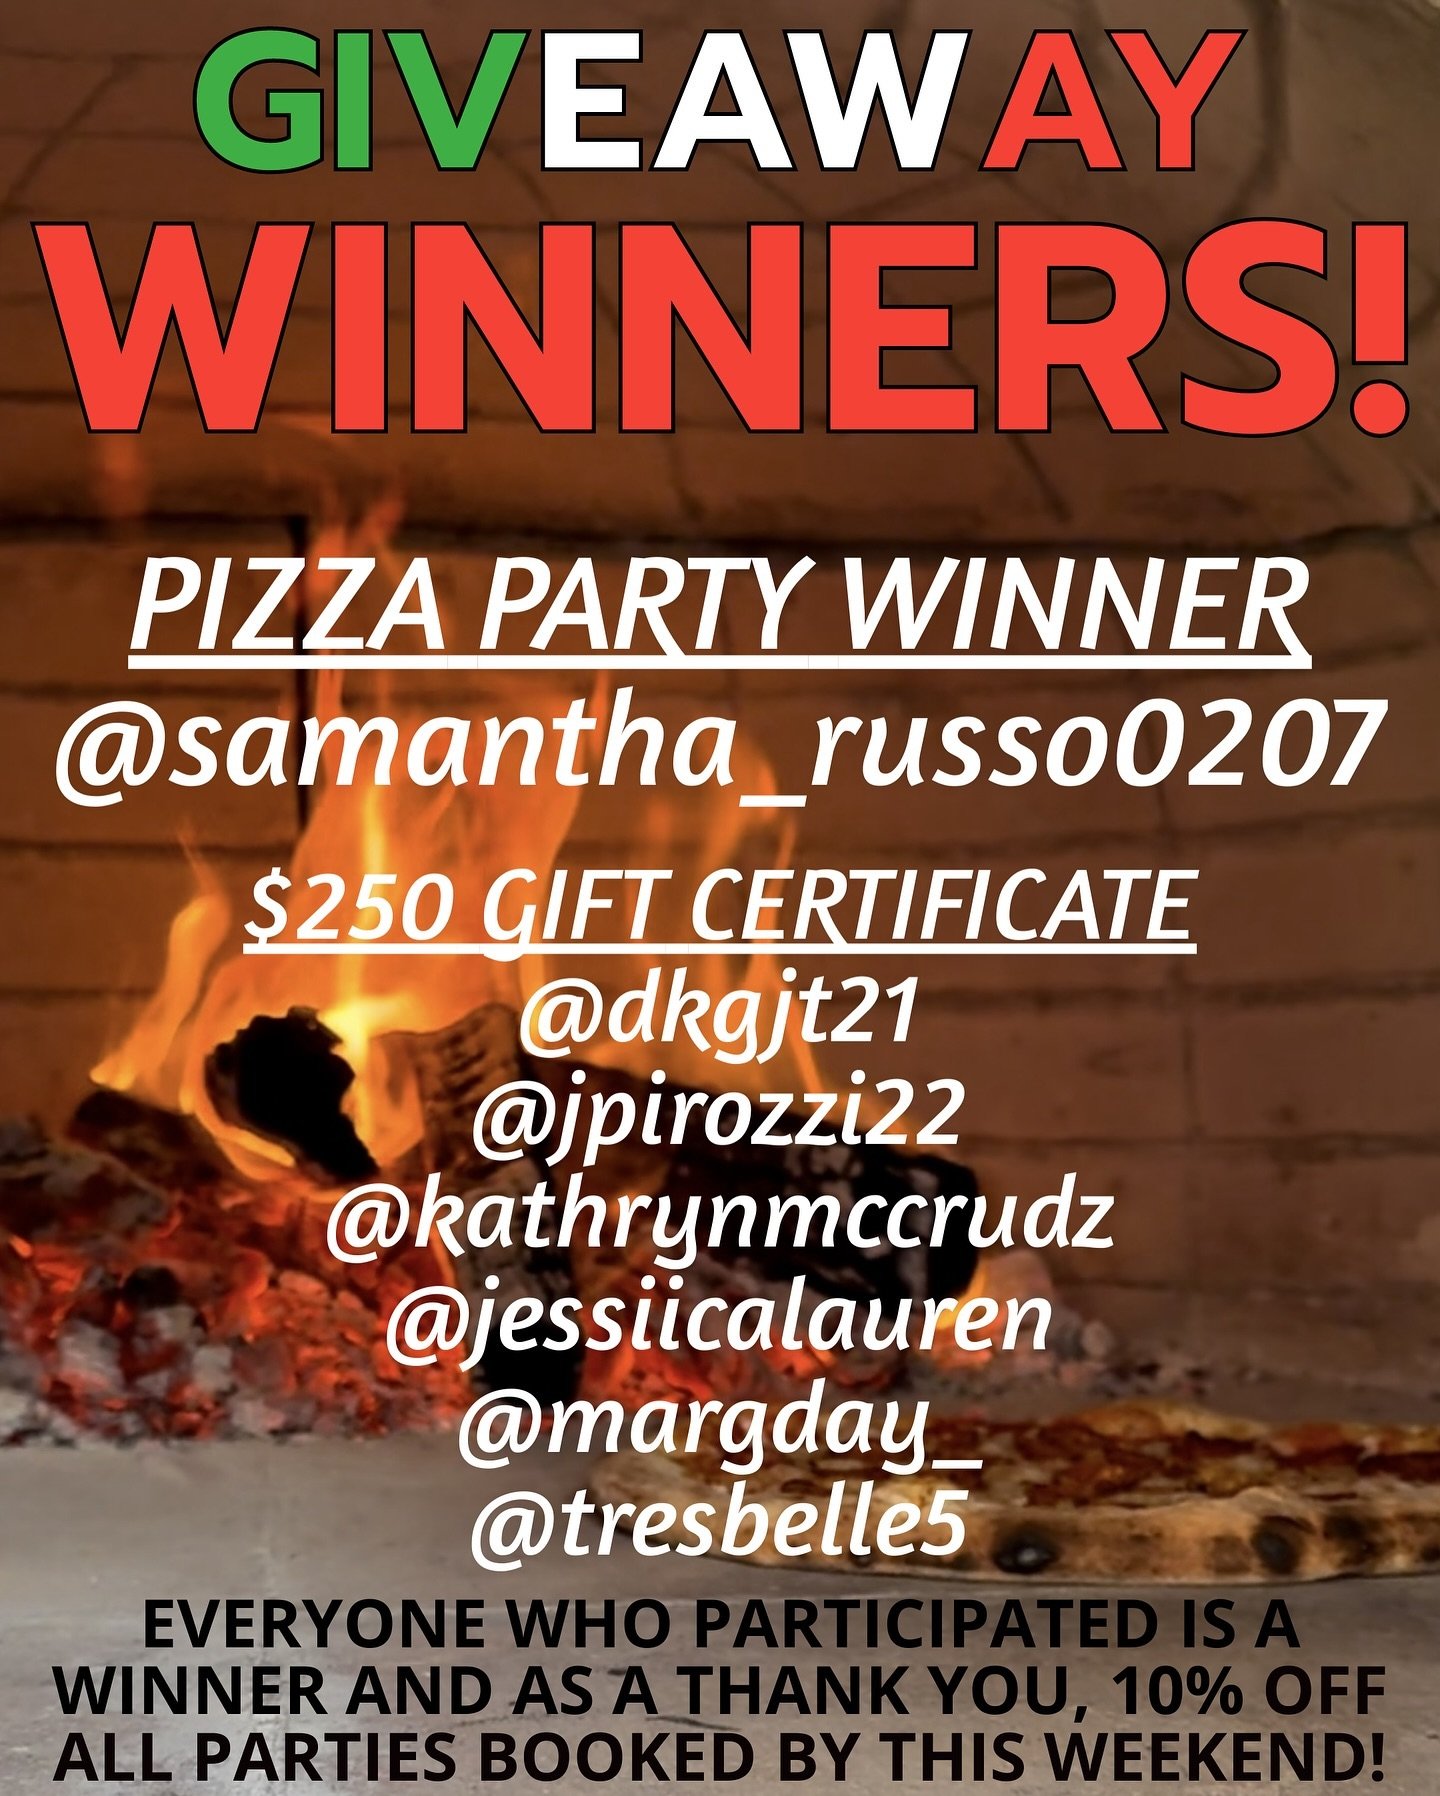 Thank you to all of our amazing followers, we couldn&rsquo;t have asked for a better outcome! We added a few extra winners just because it went so well. Take advantage of the 10% this weekend! 🍕🍕🍕 Winners please message us!